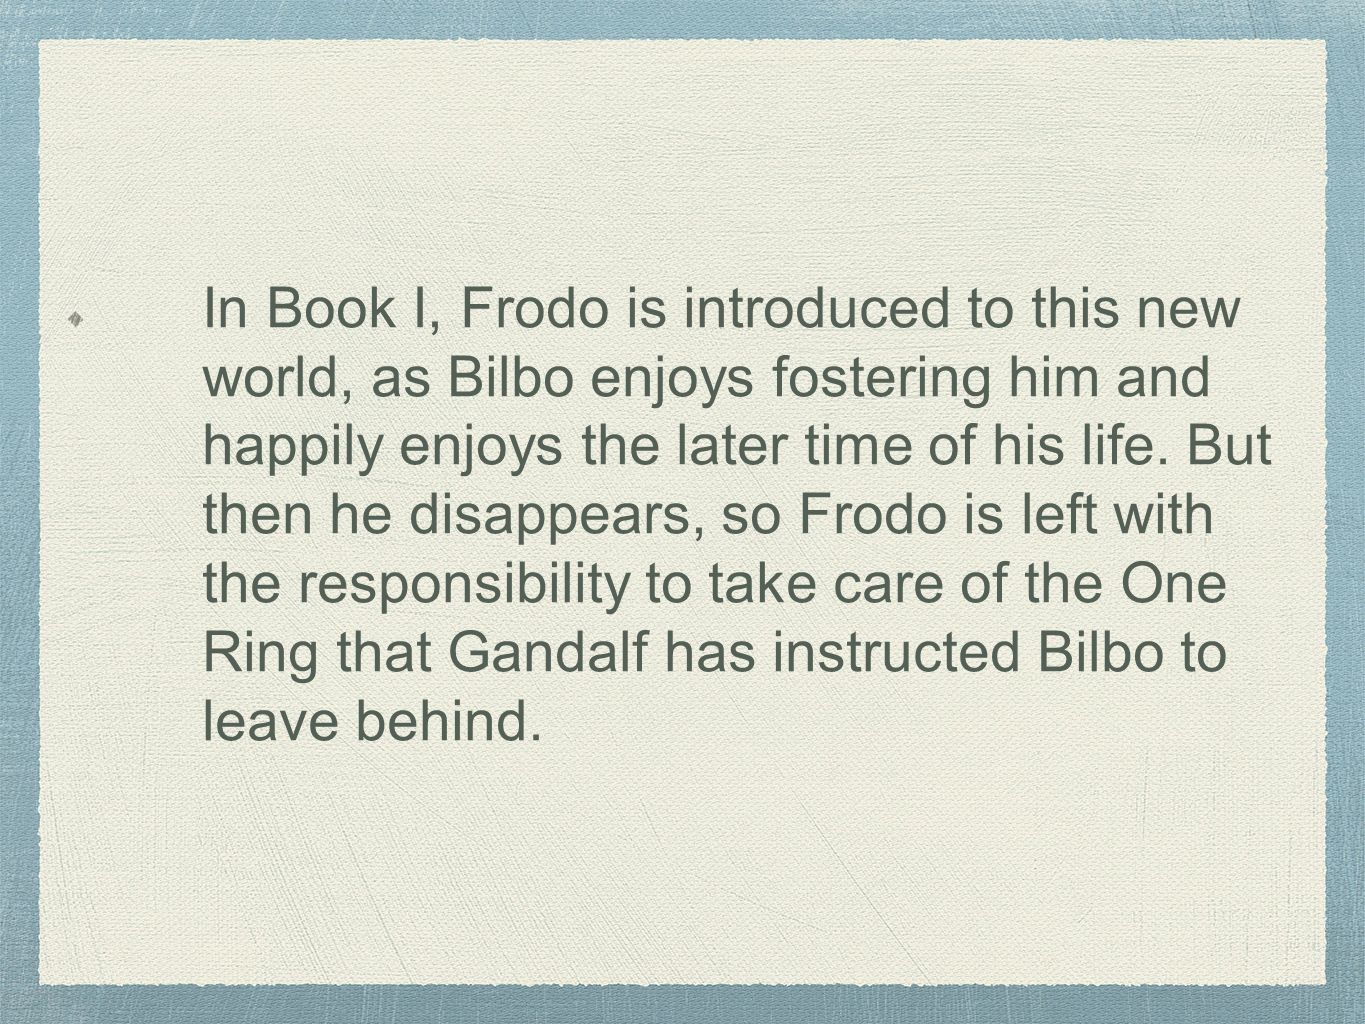 In Book I, Frodo is introduced to this new world, as Bilbo enjoys fostering him and happily enjoys the later time of his life.